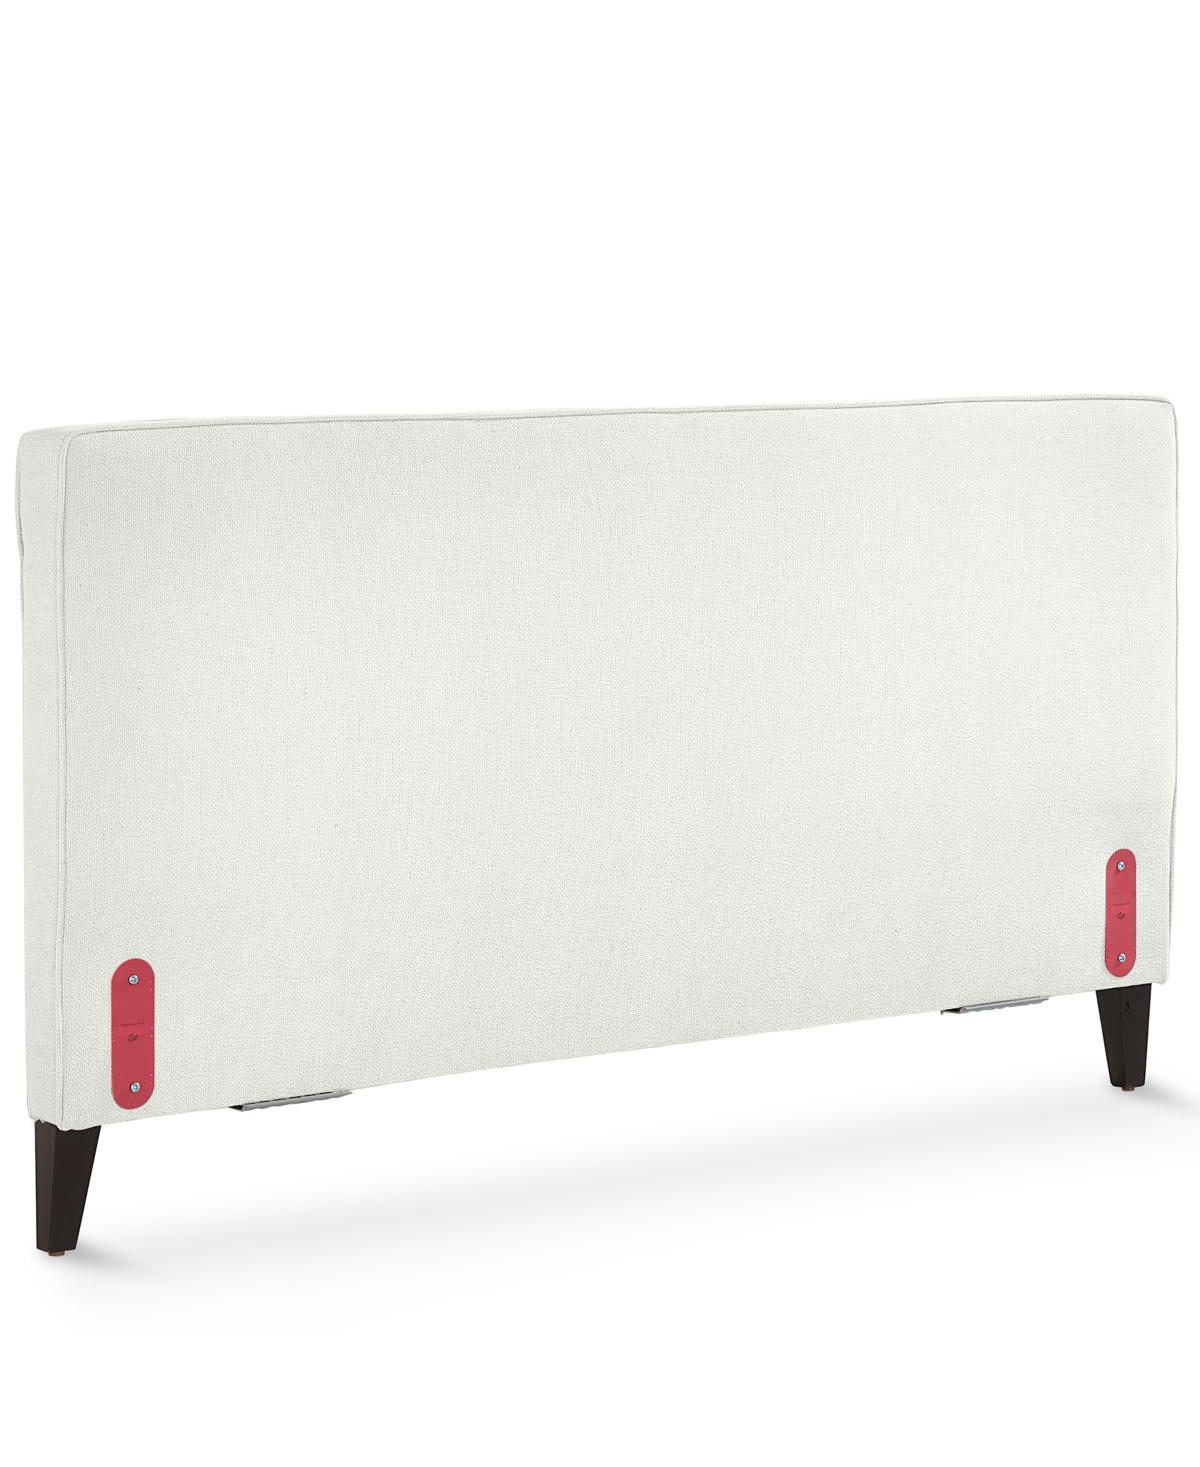 Furniture Mariley Upholstered Full Headboard In Oyster